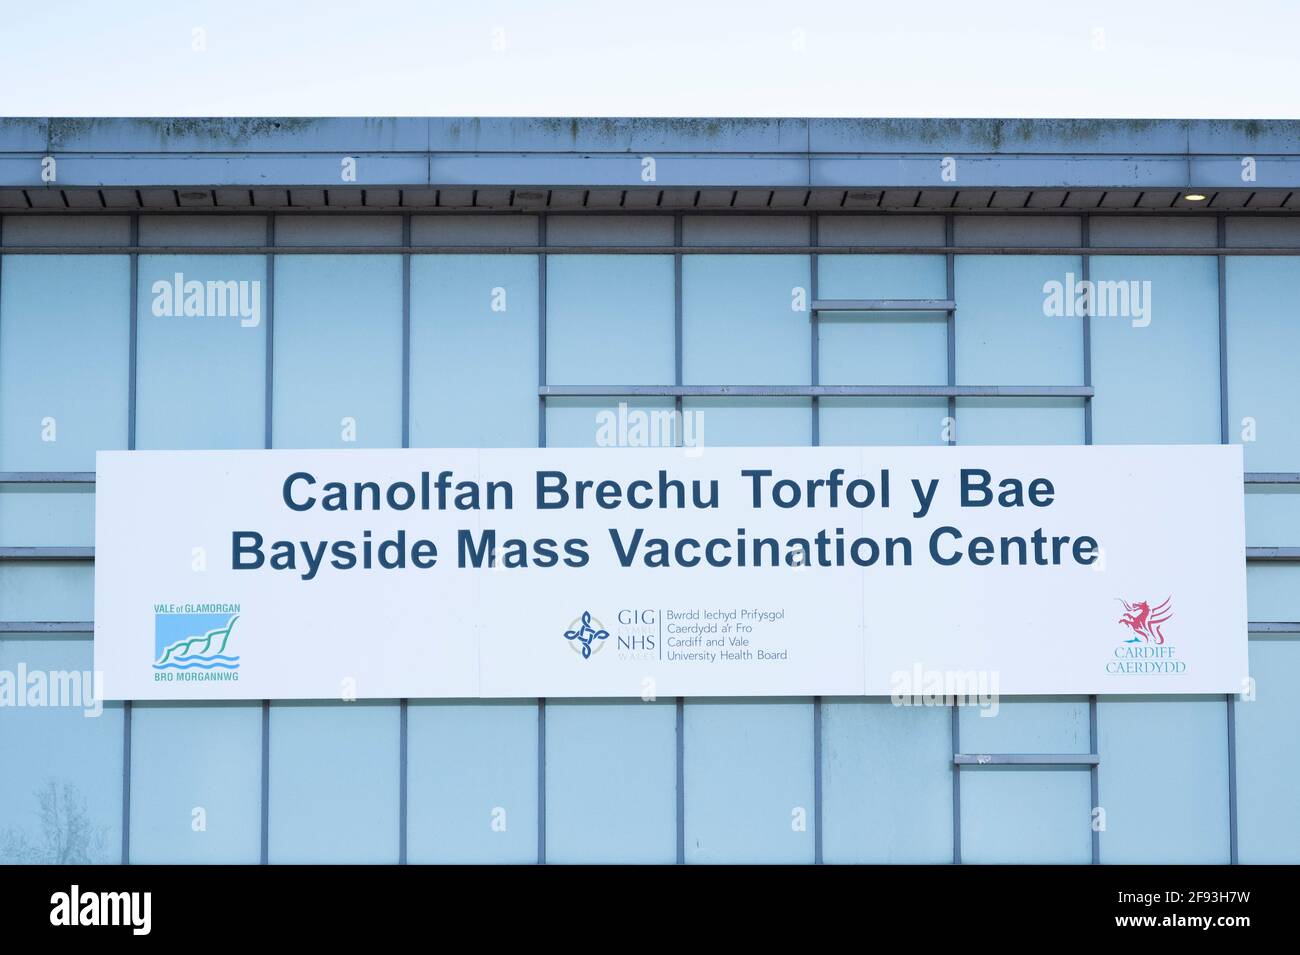 CARDIFF, WALES - MARCH 25: Bayside mass vaccination centre in Cardiff Bay on March 25, 2021 in Cardiff, Wales. The infection rate across Wales is now Stock Photo